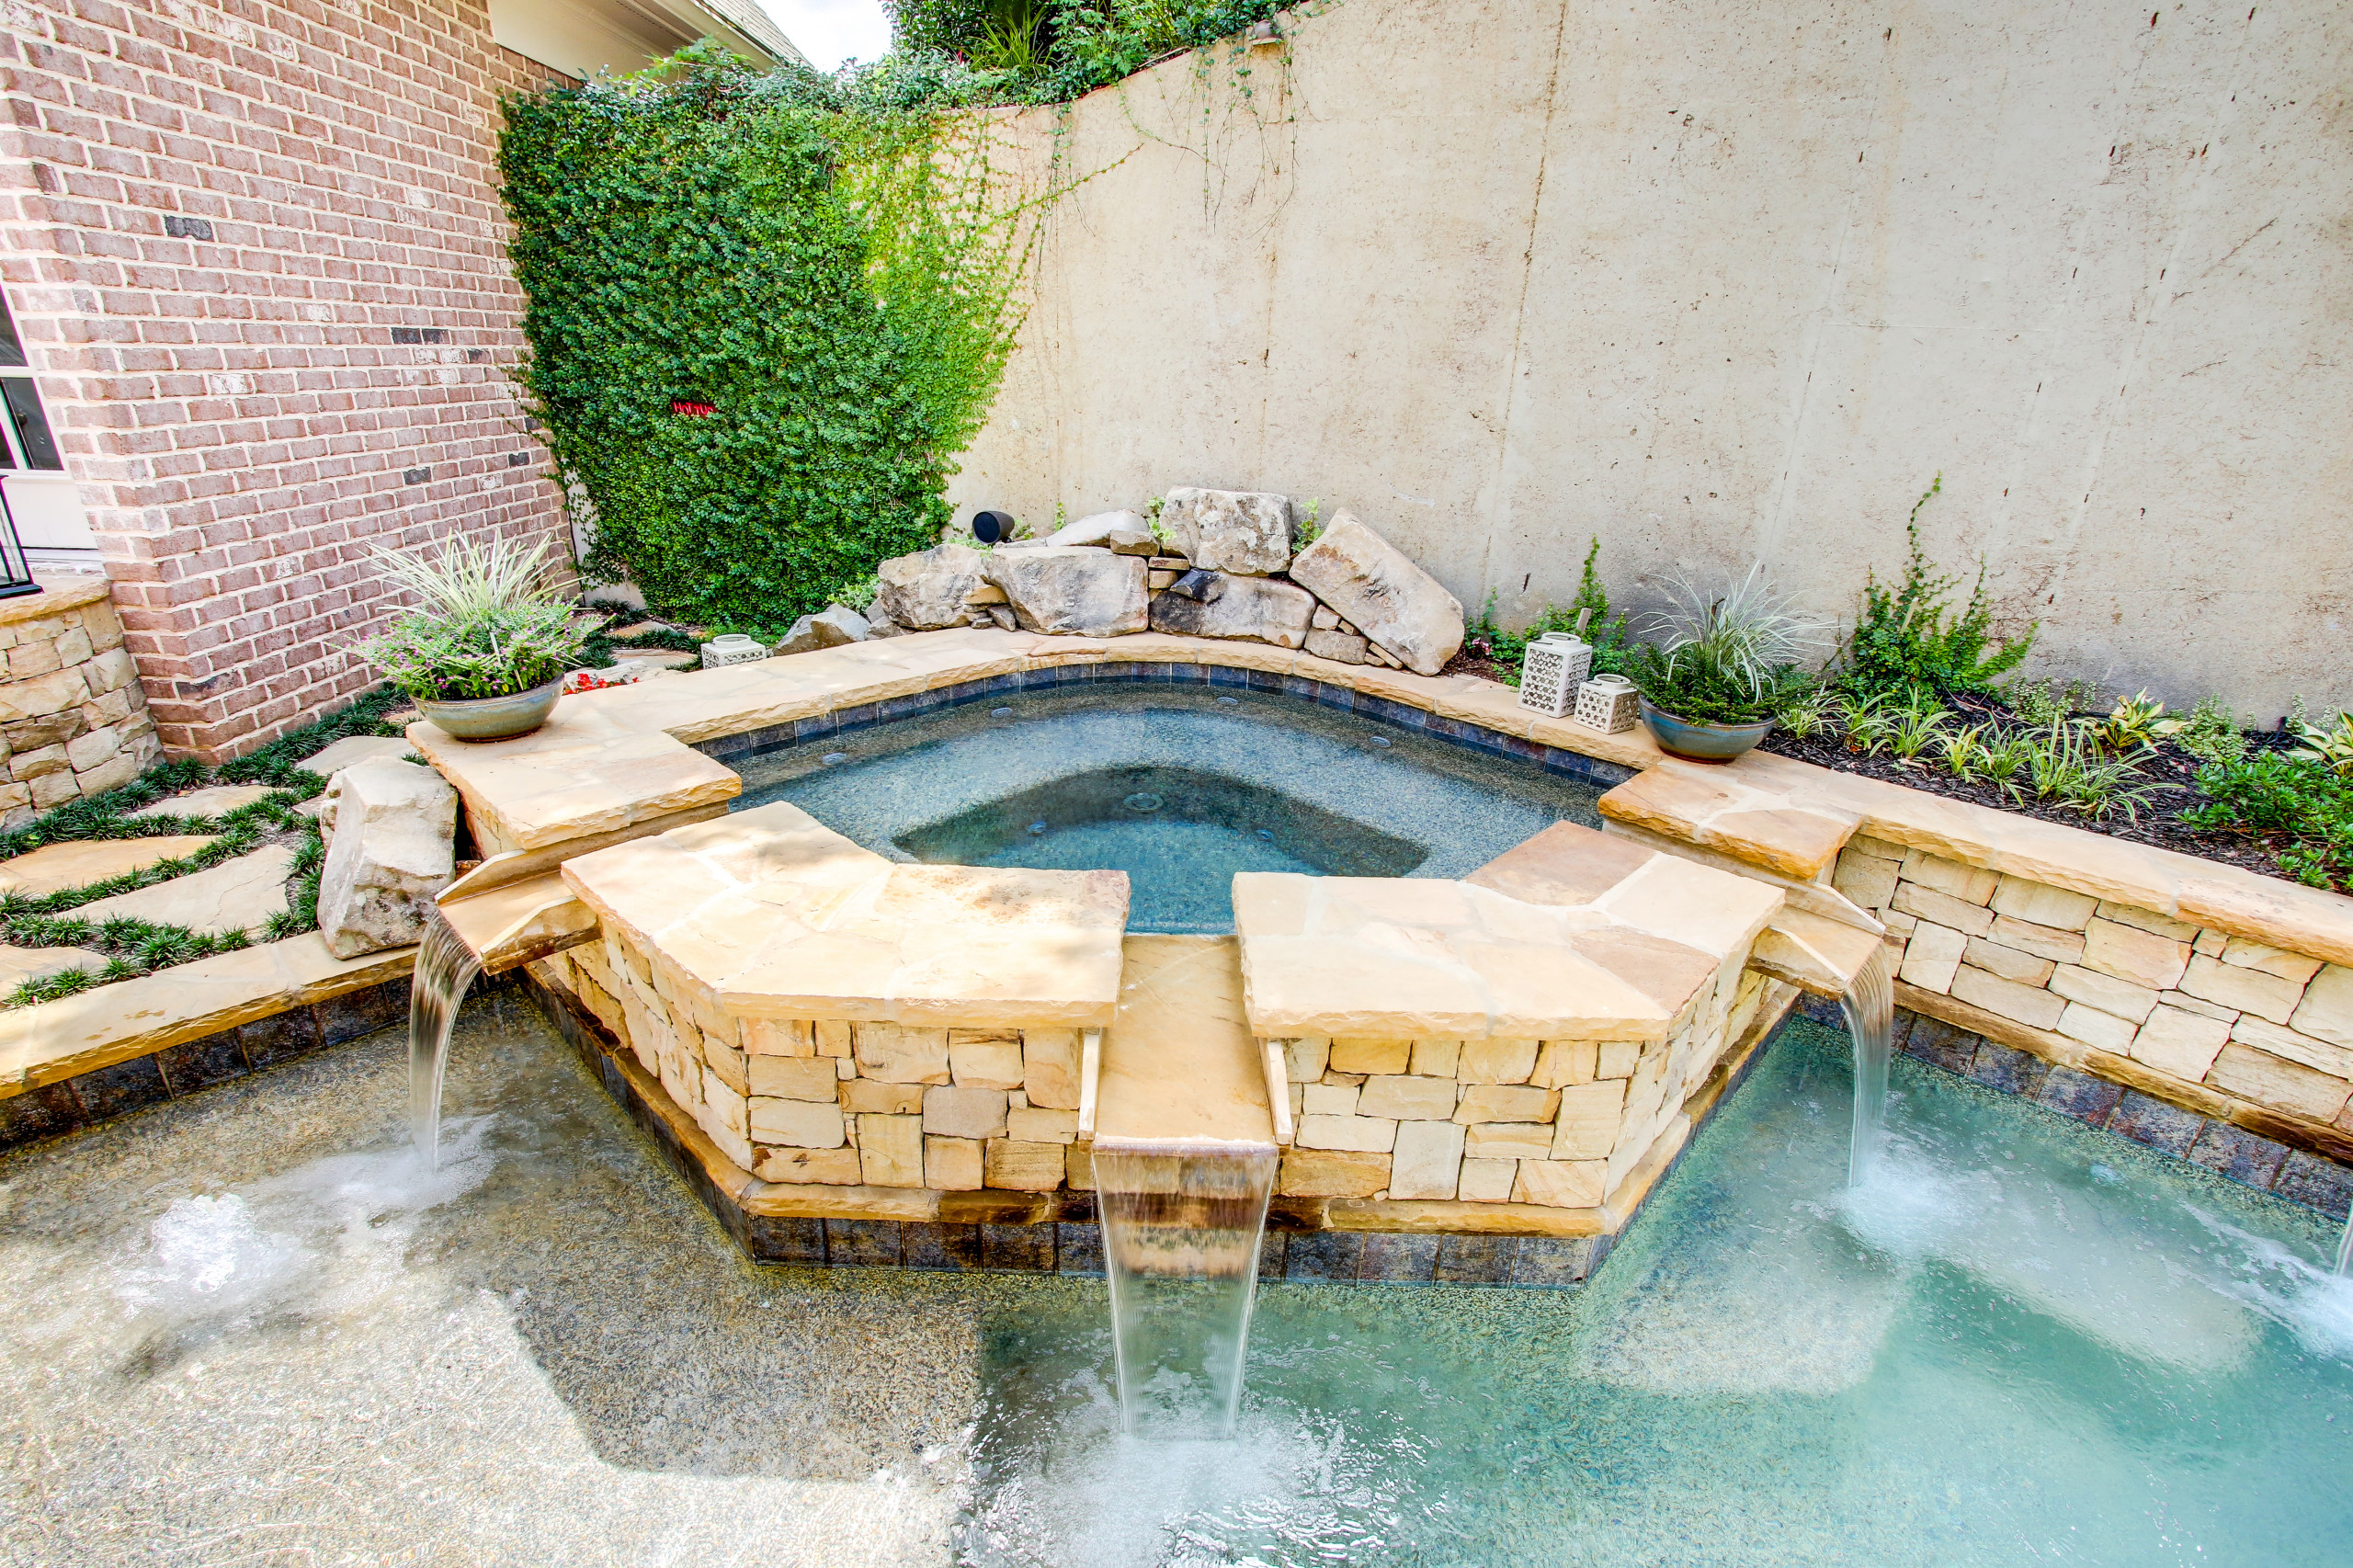 A unique pool design for a small space - Transitional - Pool - Atlanta - by Thrasher  Pool and Spa | Houzz